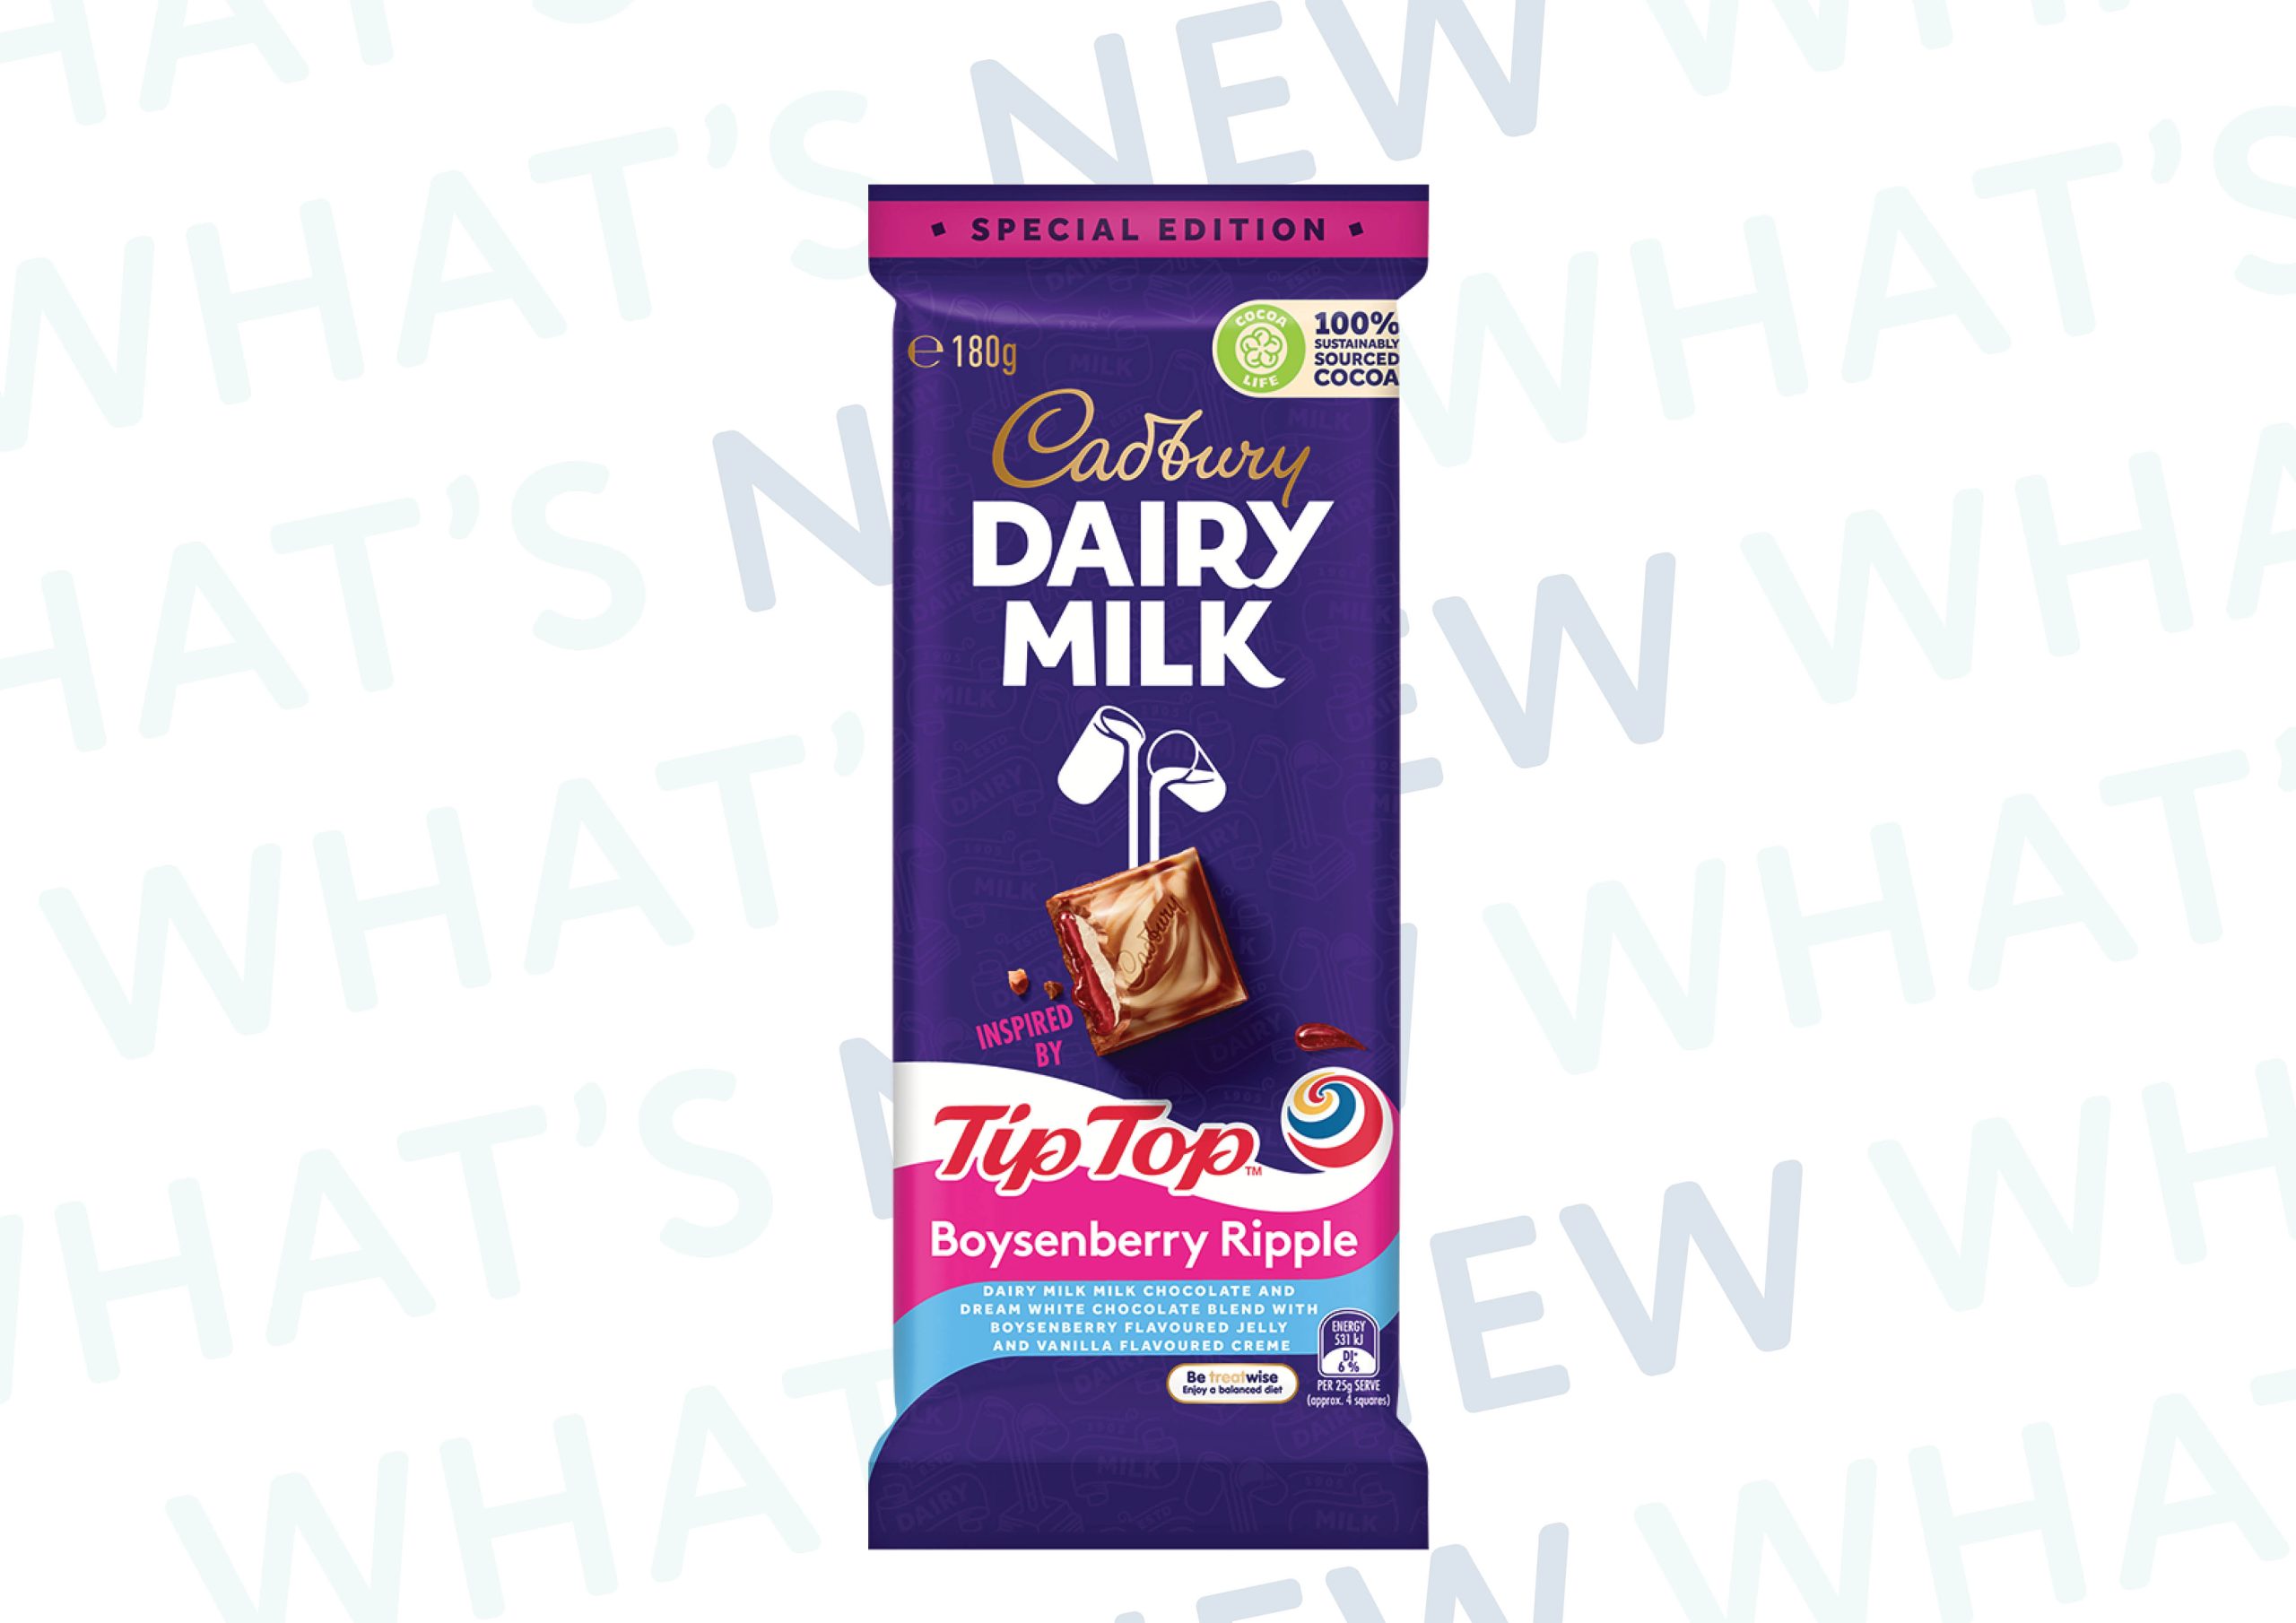 Cadbury and Tip Top Release ta new special edition boysenberry ripple chocolate